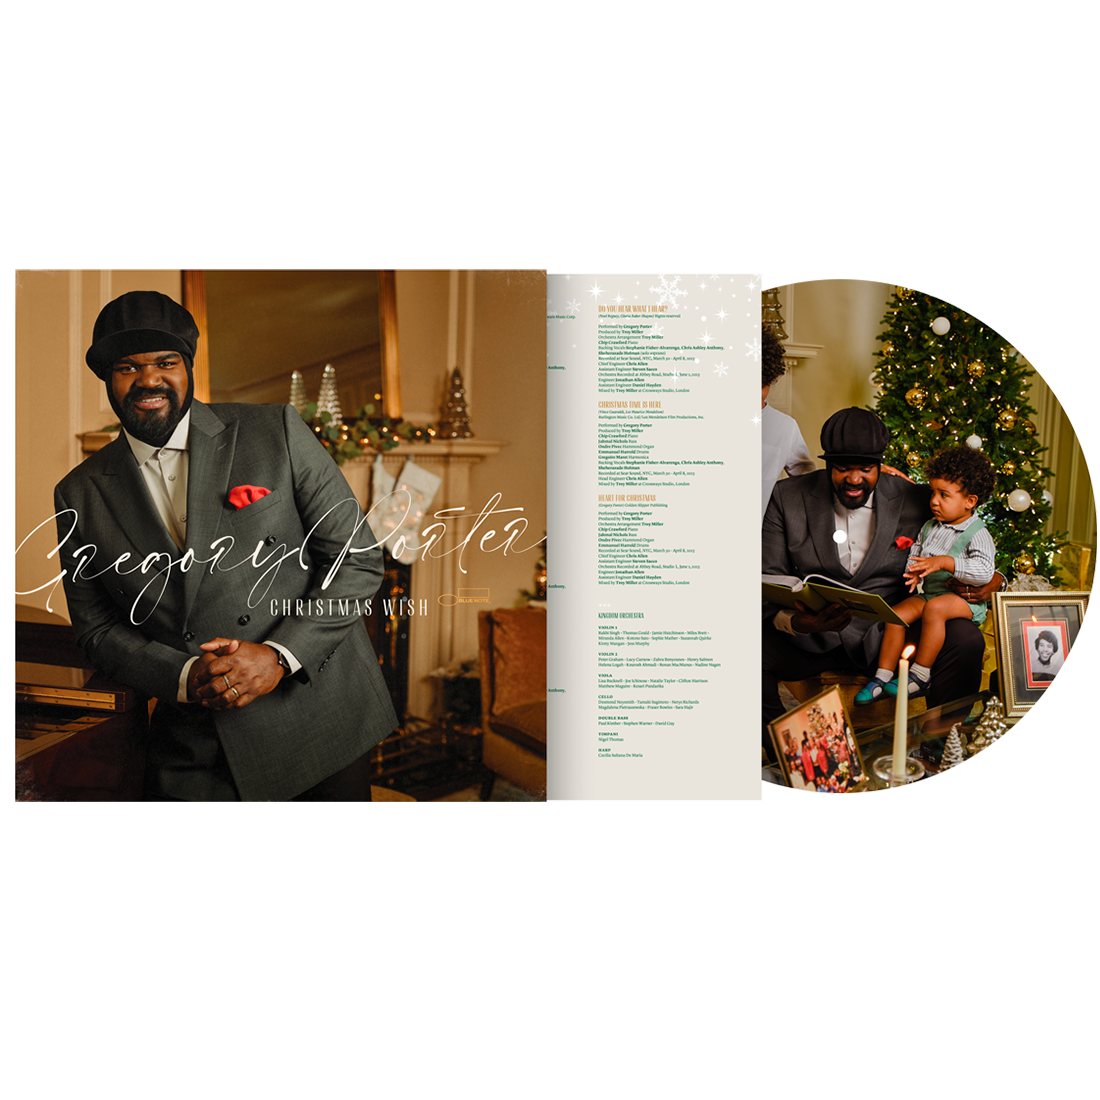 Christmas Wish Picture Disc + Signed Print